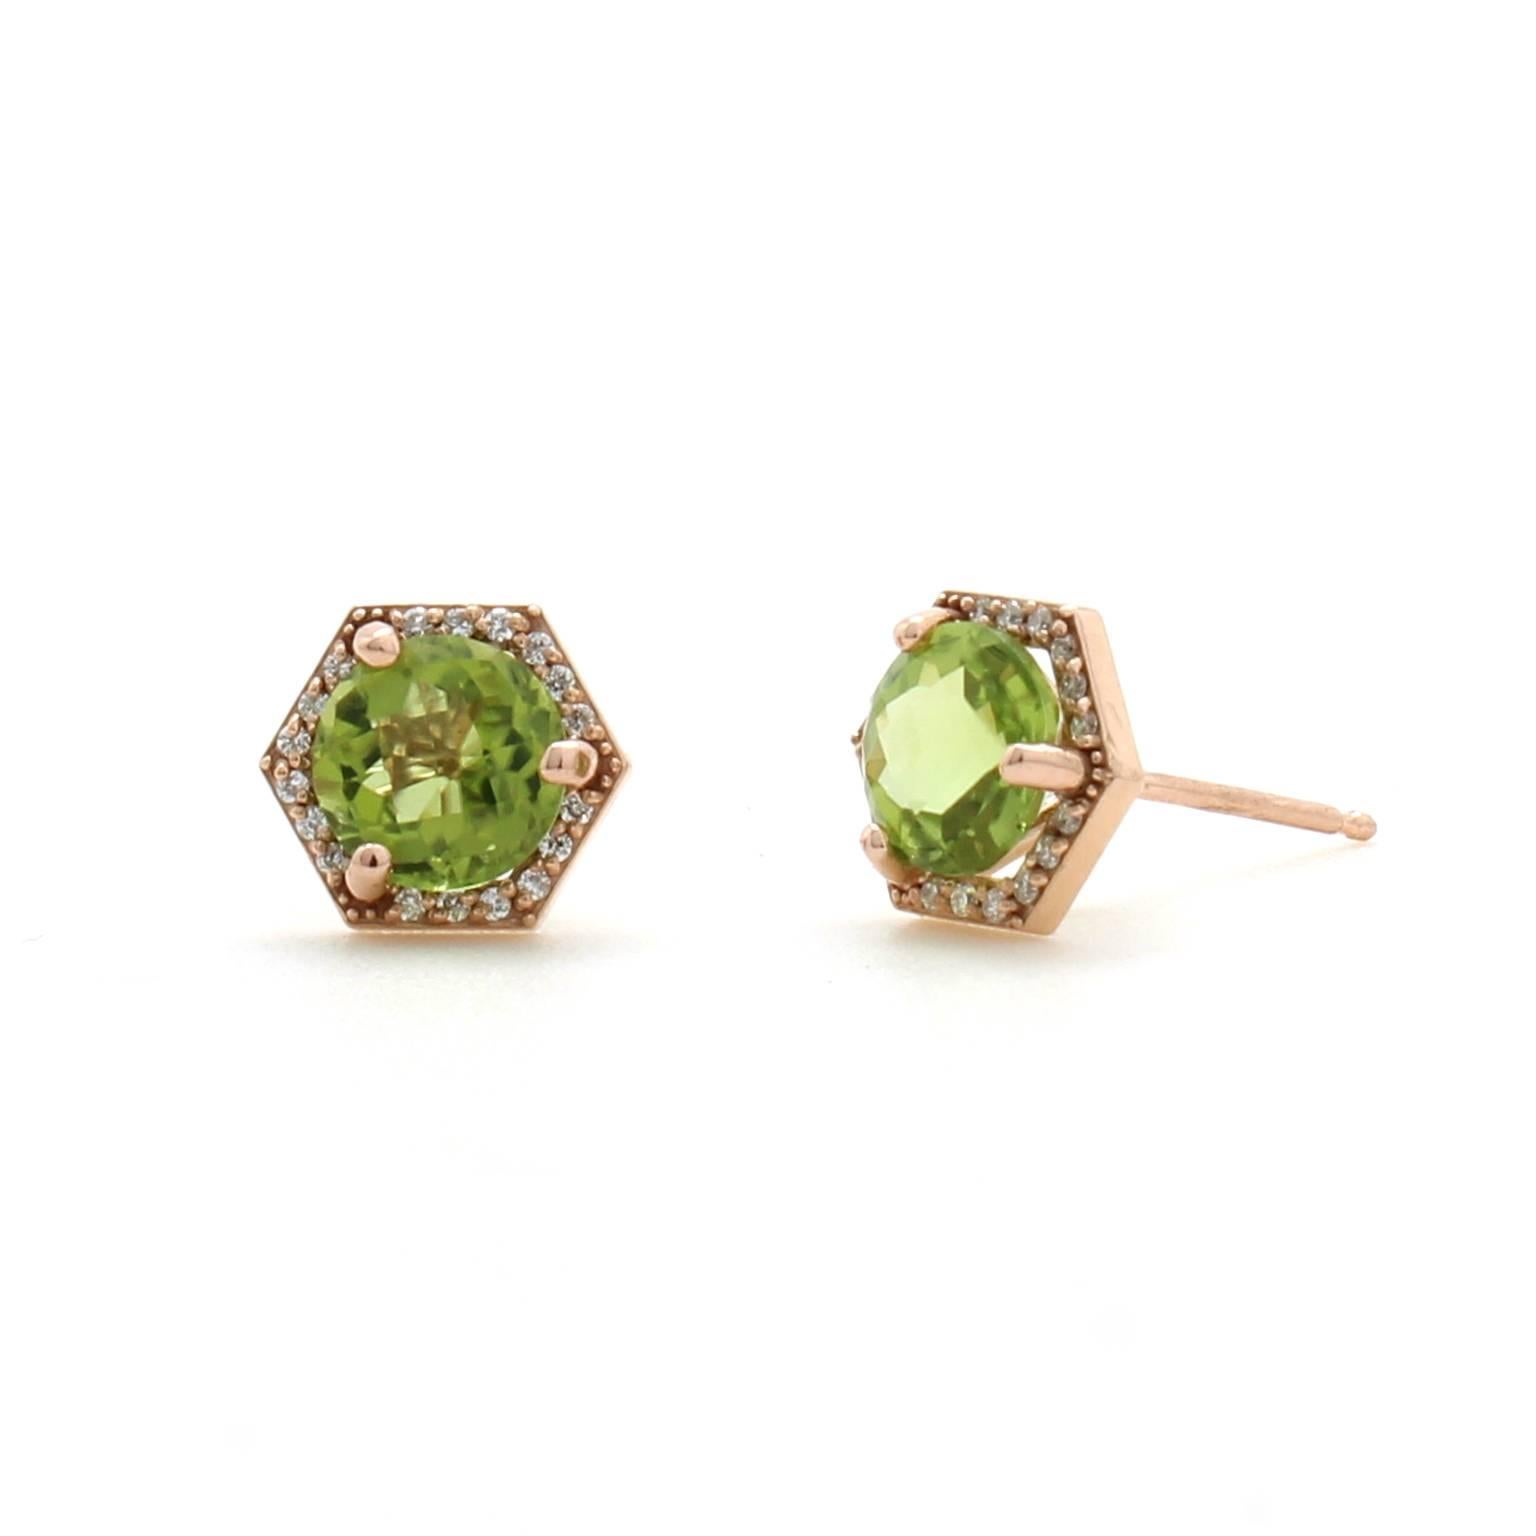 These geometric stud earrings feature natural round peridot gemstones surrounded by a halo of pave set white diamonds. The earrings are made of reclaimed 14k rose gold and have friction posts and backs.

The peridots measure 6mm in diameter. The